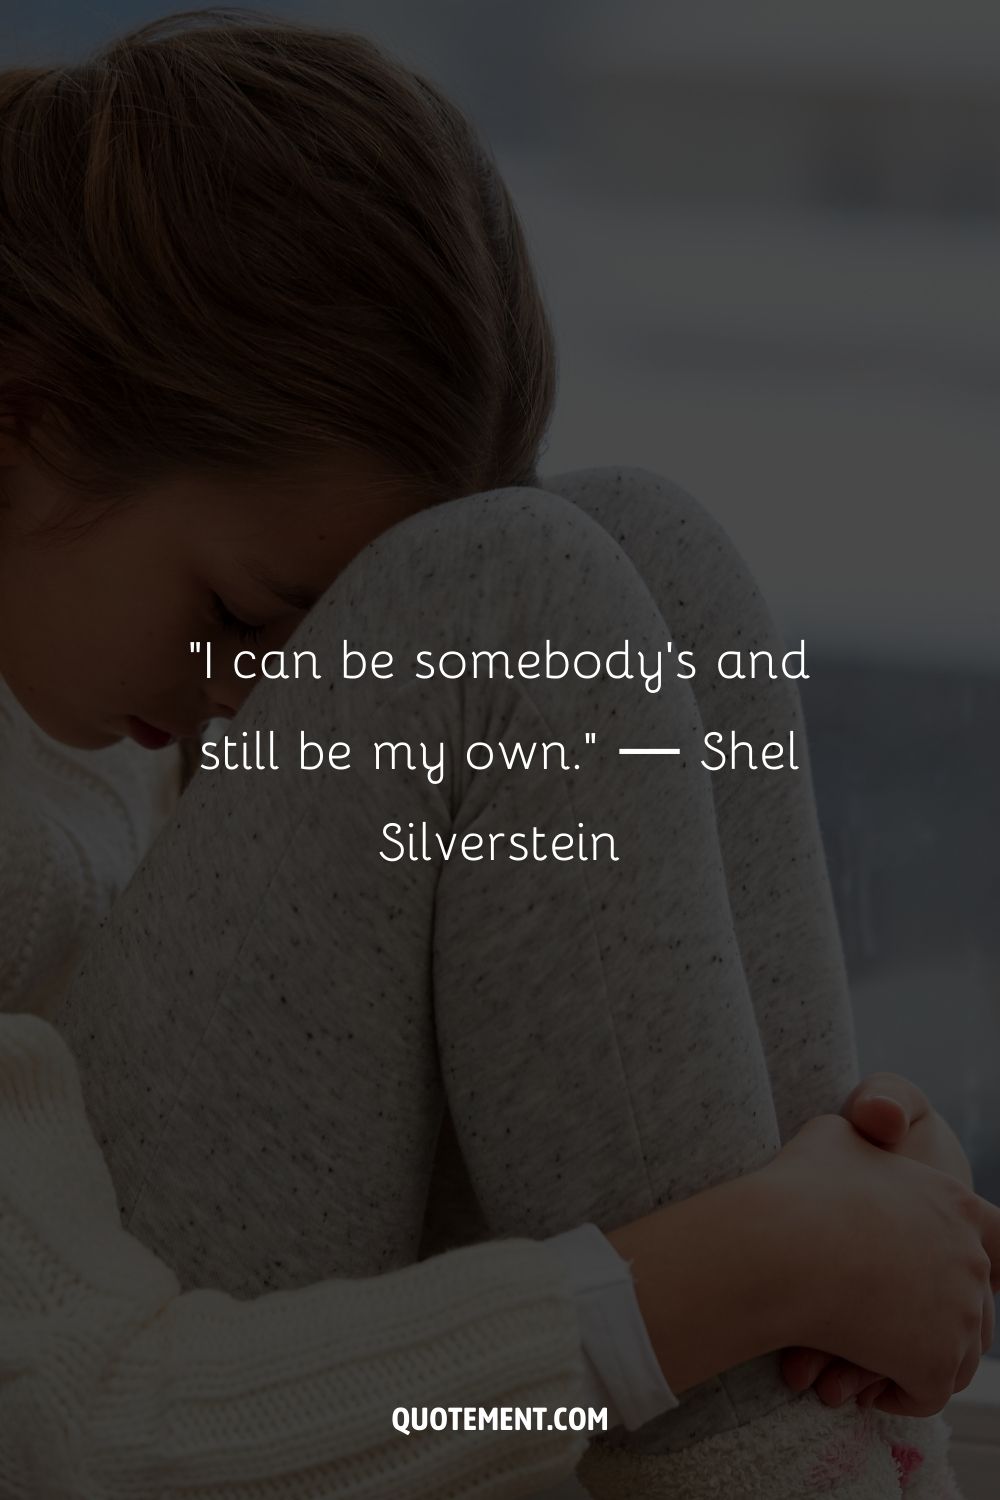 I can be somebody's and still be my own